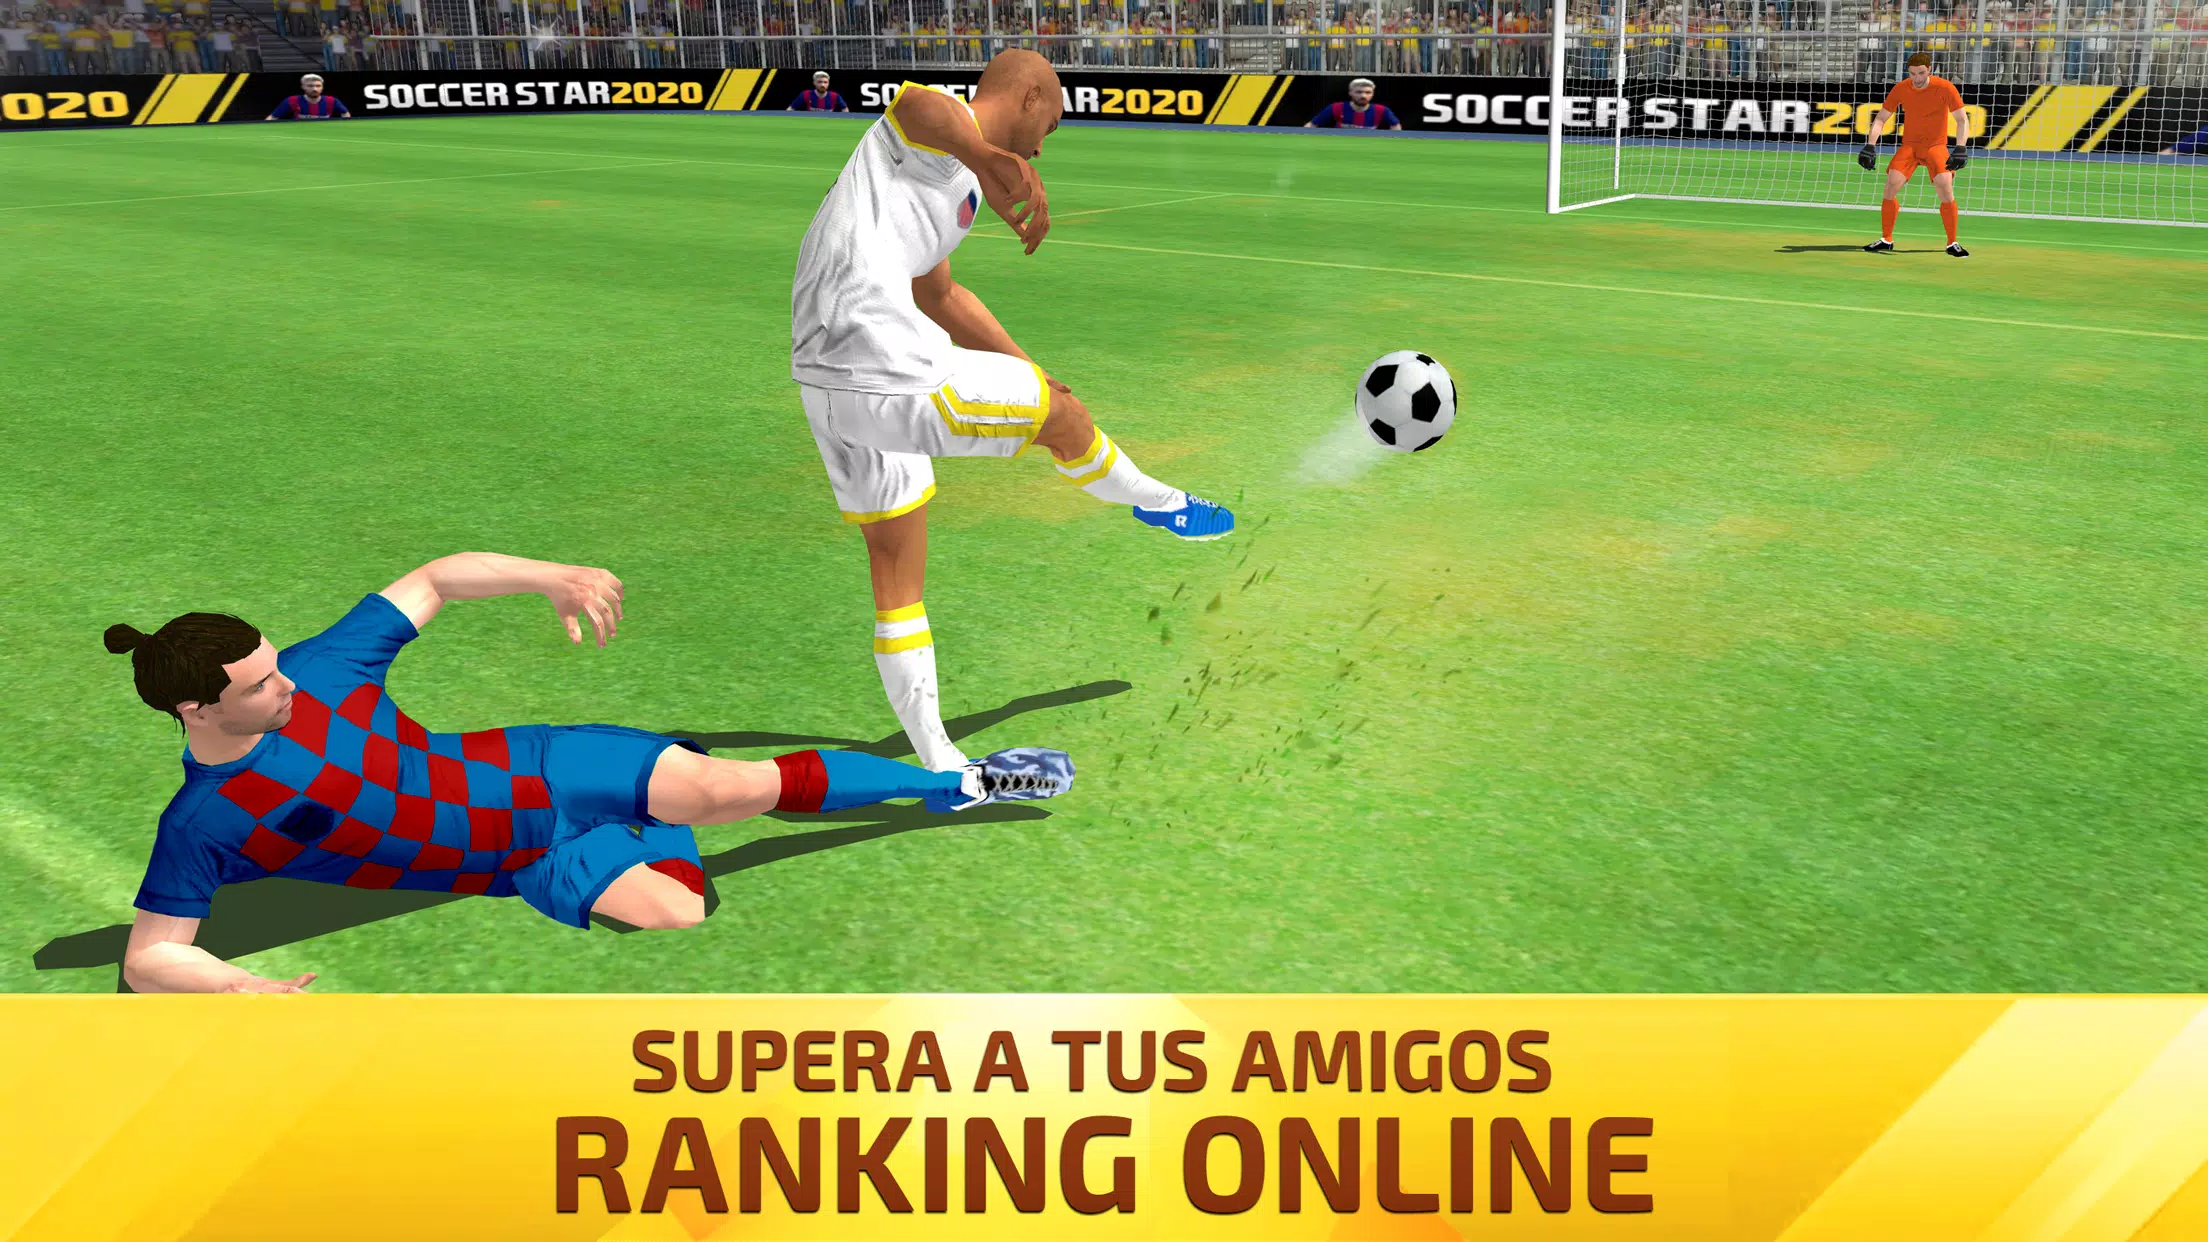 Soccer League Hero 2017 Stars Apk Download for Android- Latest version  2.0.1- com.bulky.sports.real.soccer.football.manager